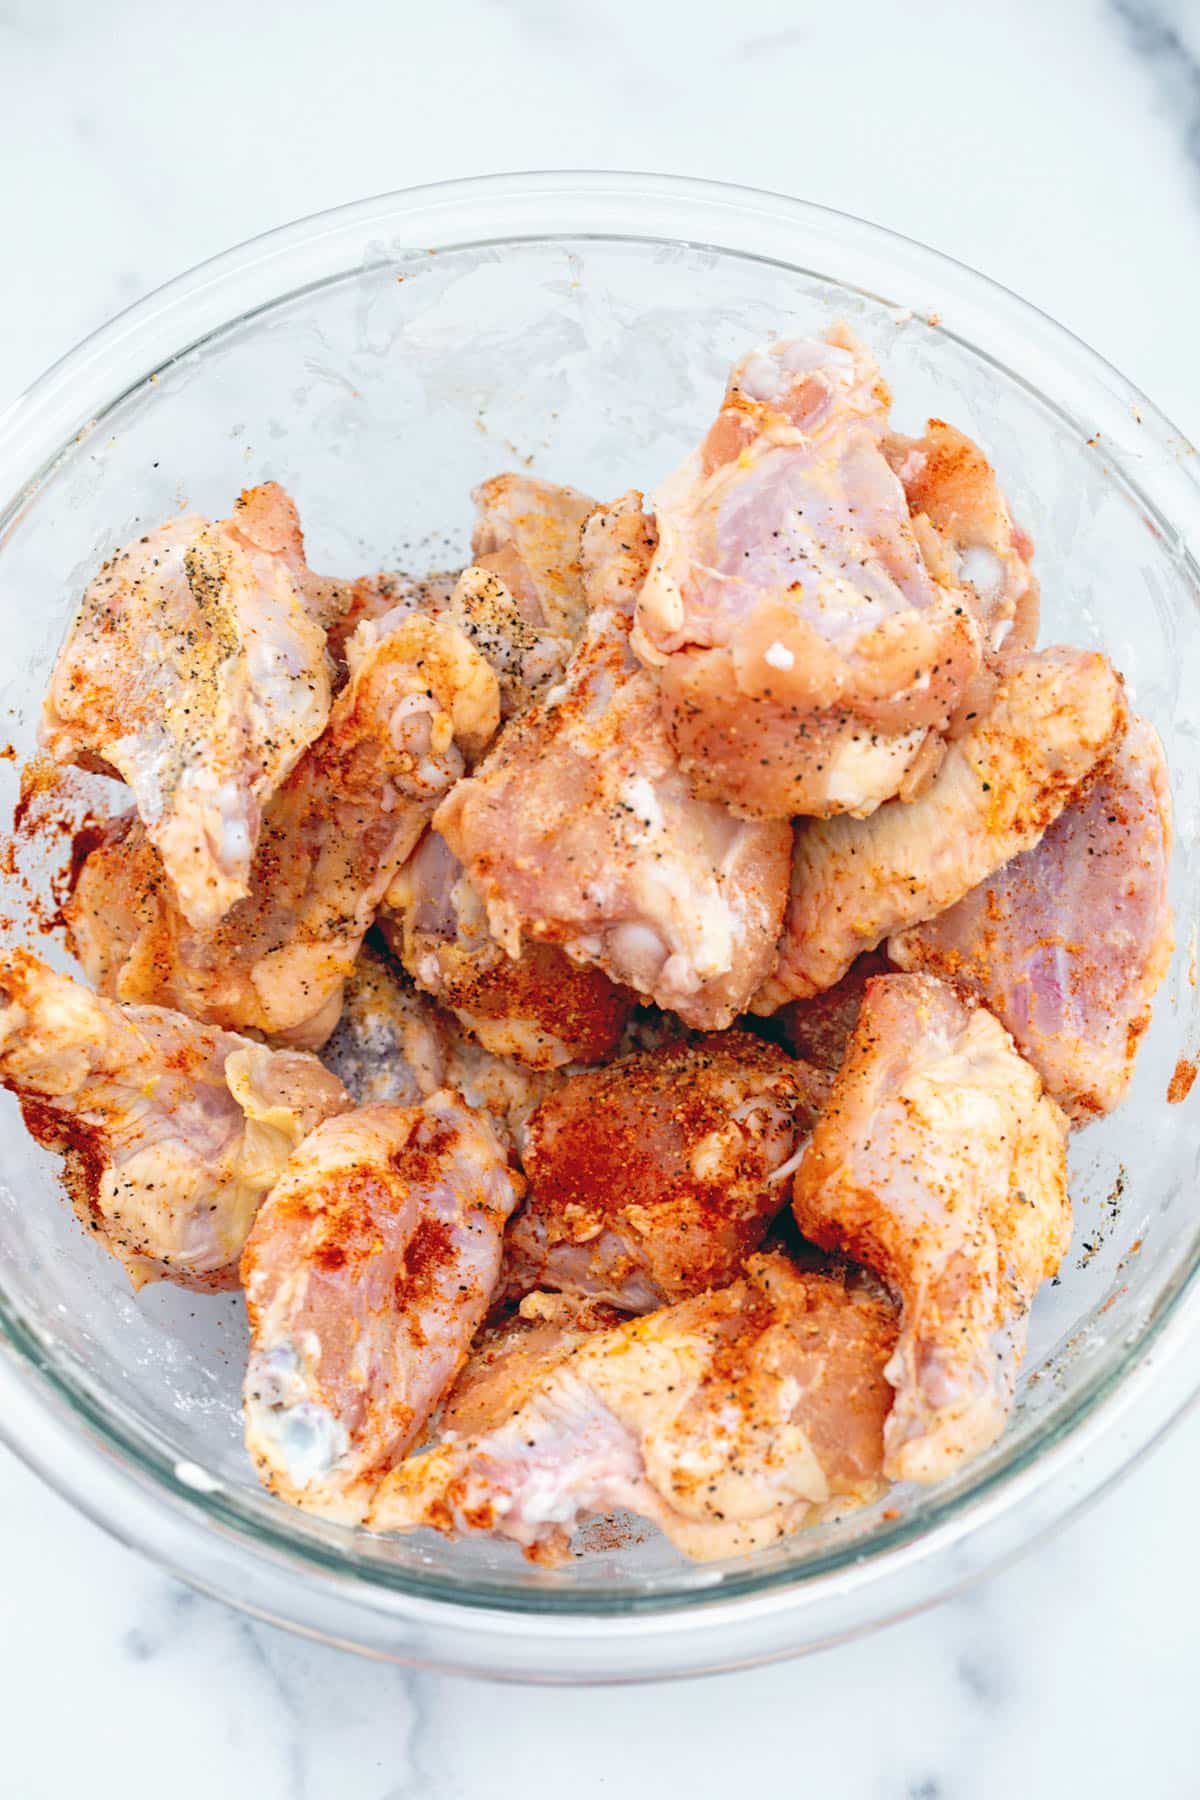 Chicken wings with seasoning in a bowl.